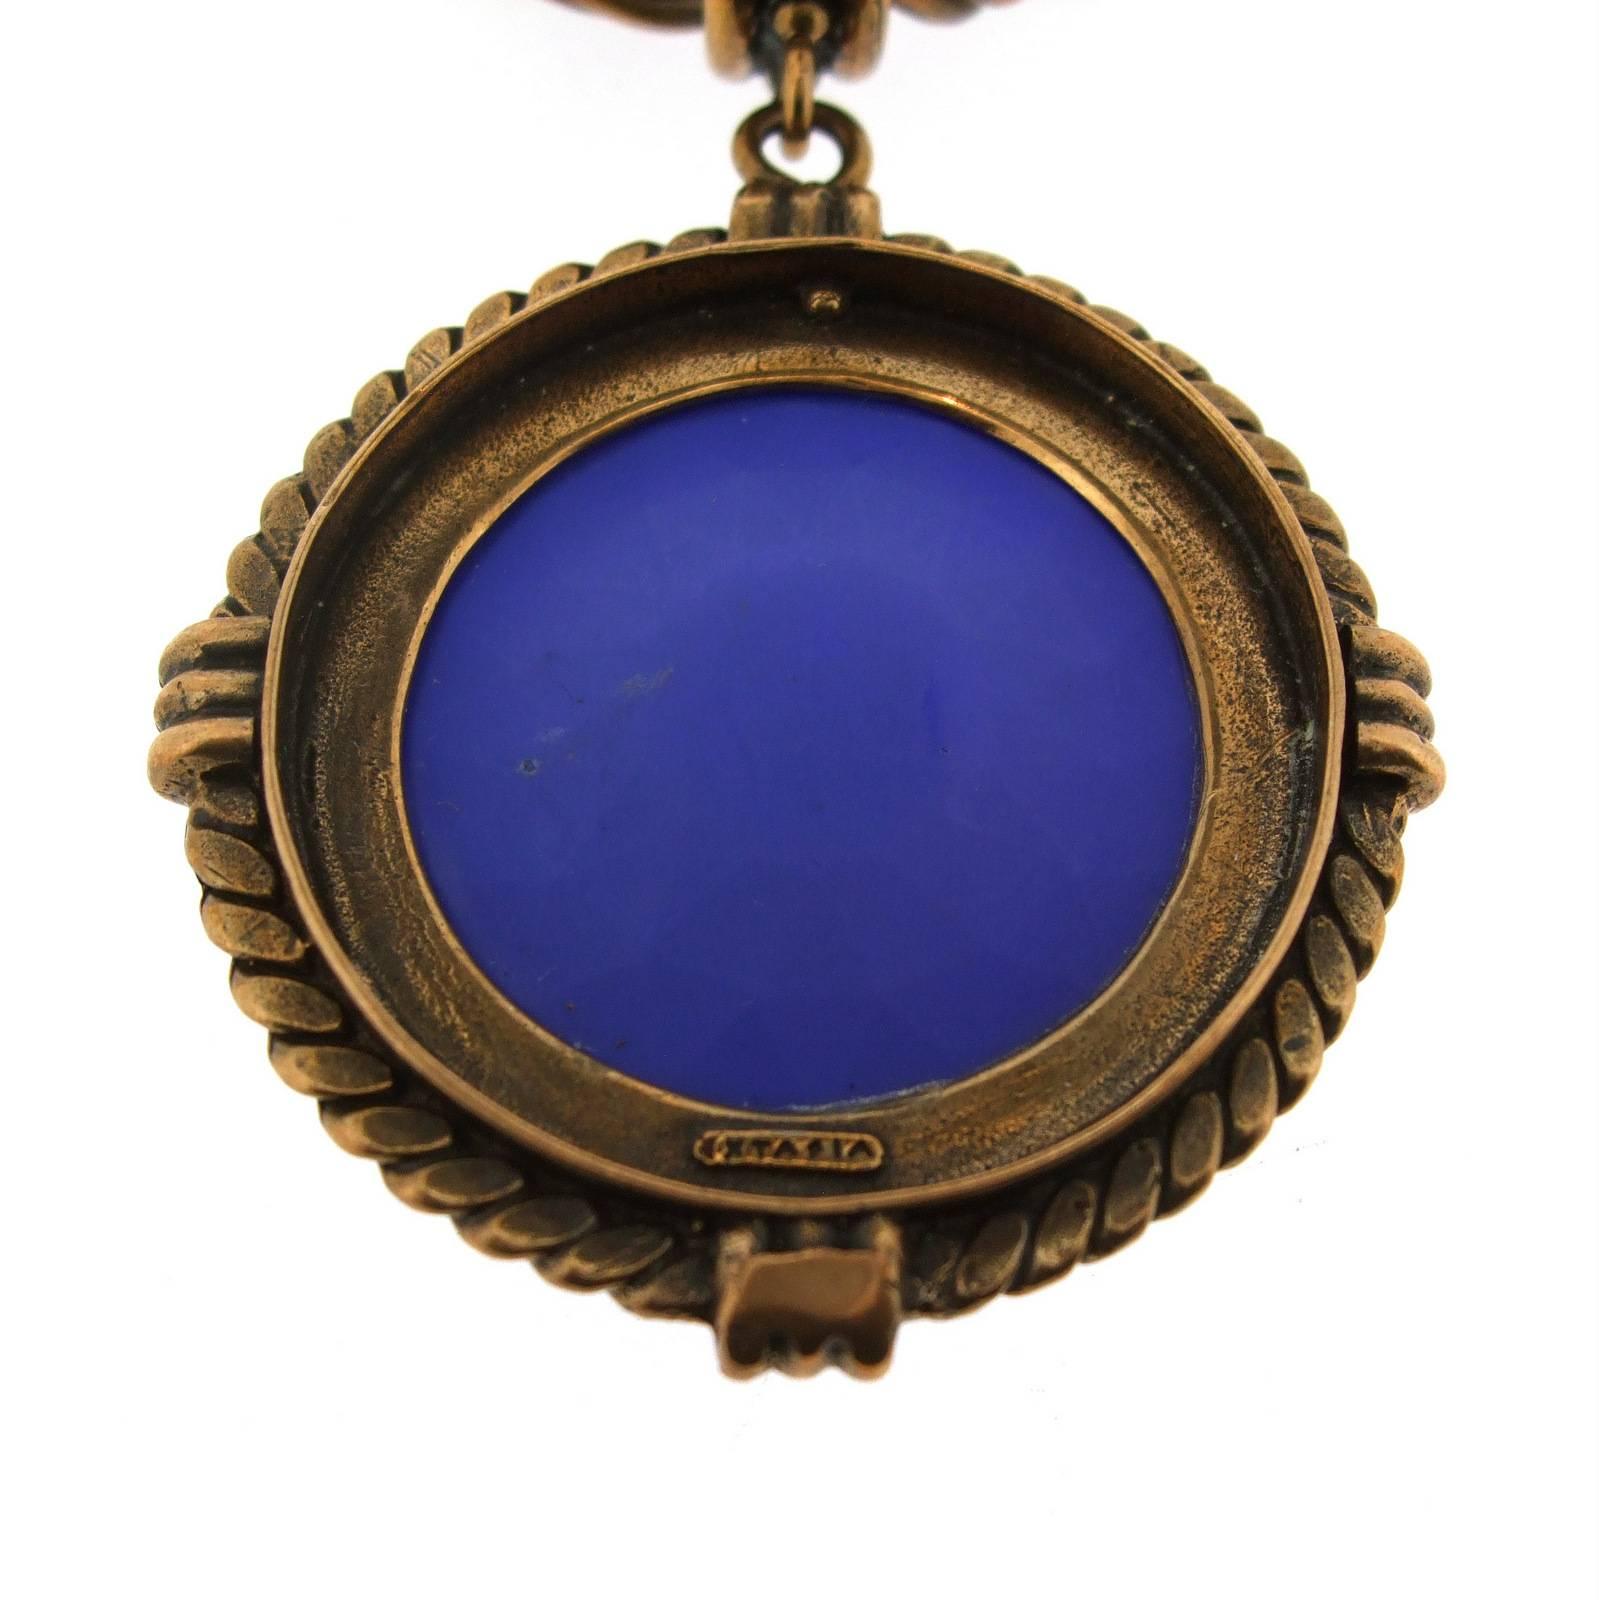 Extasia Intaglio Charm Necklace Cobalt Blue In Excellent Condition For Sale In London, GB